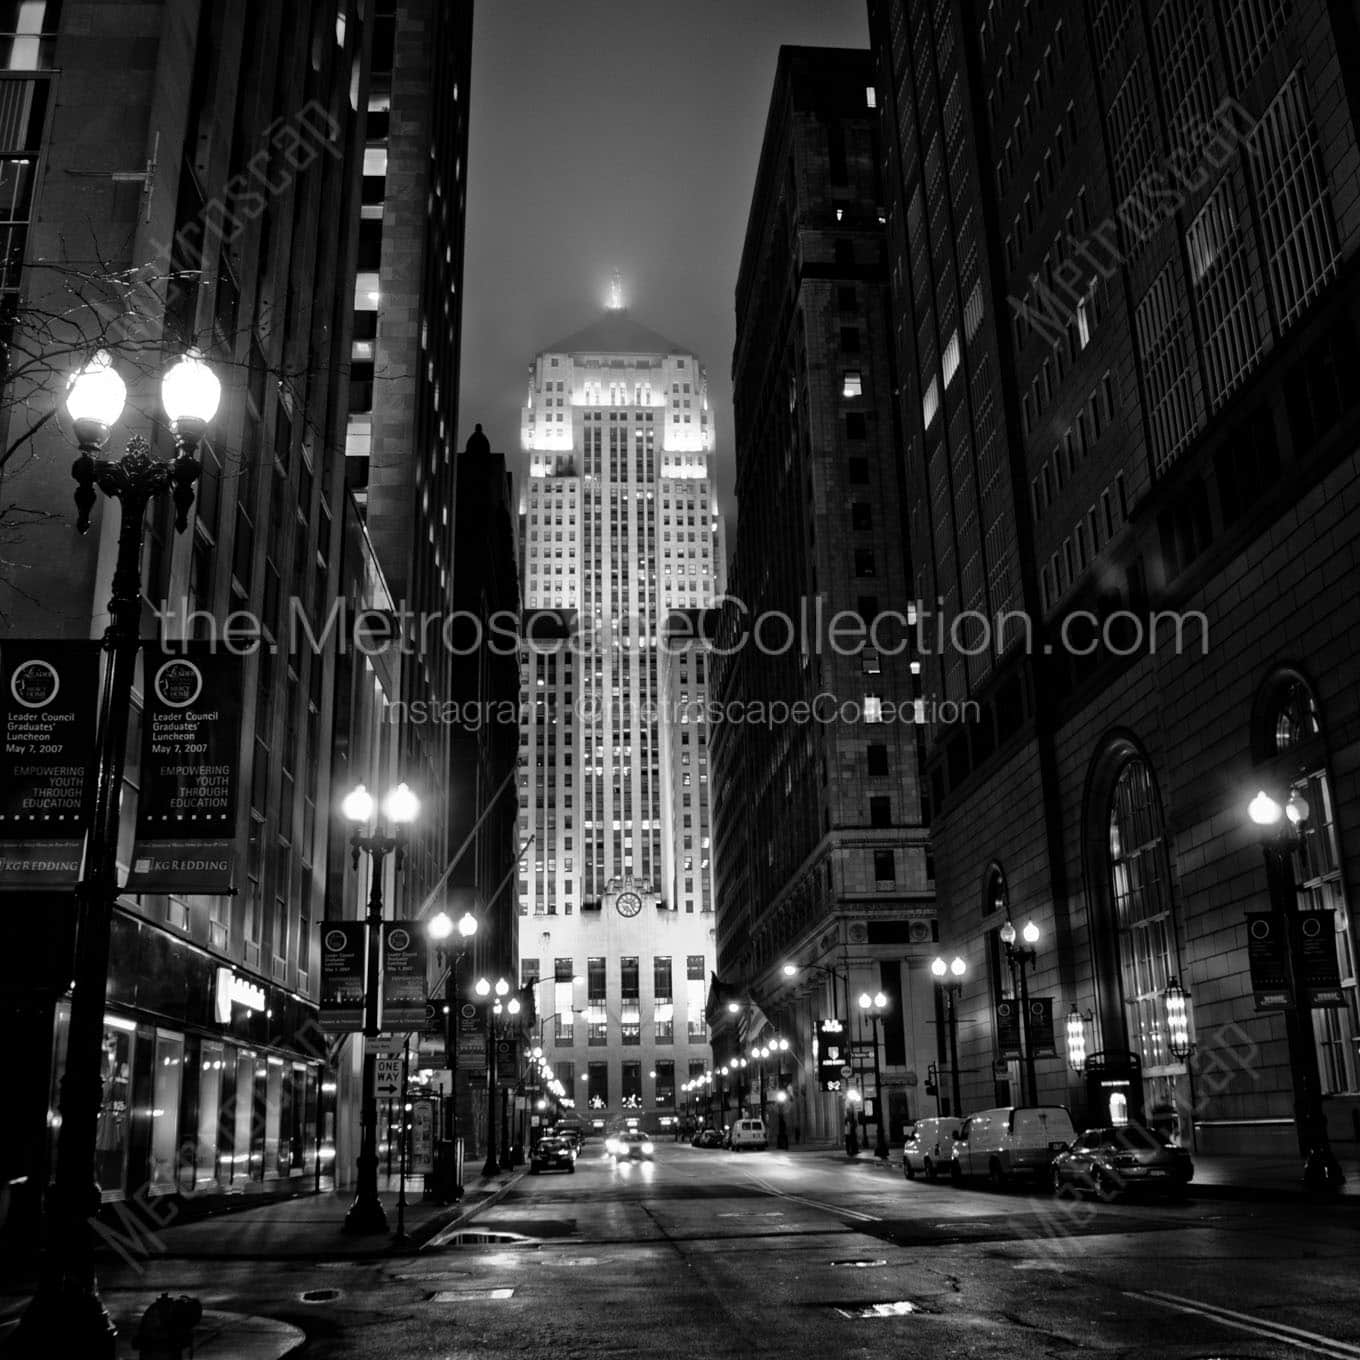 chicago board of trade building at night Black & White Office Art